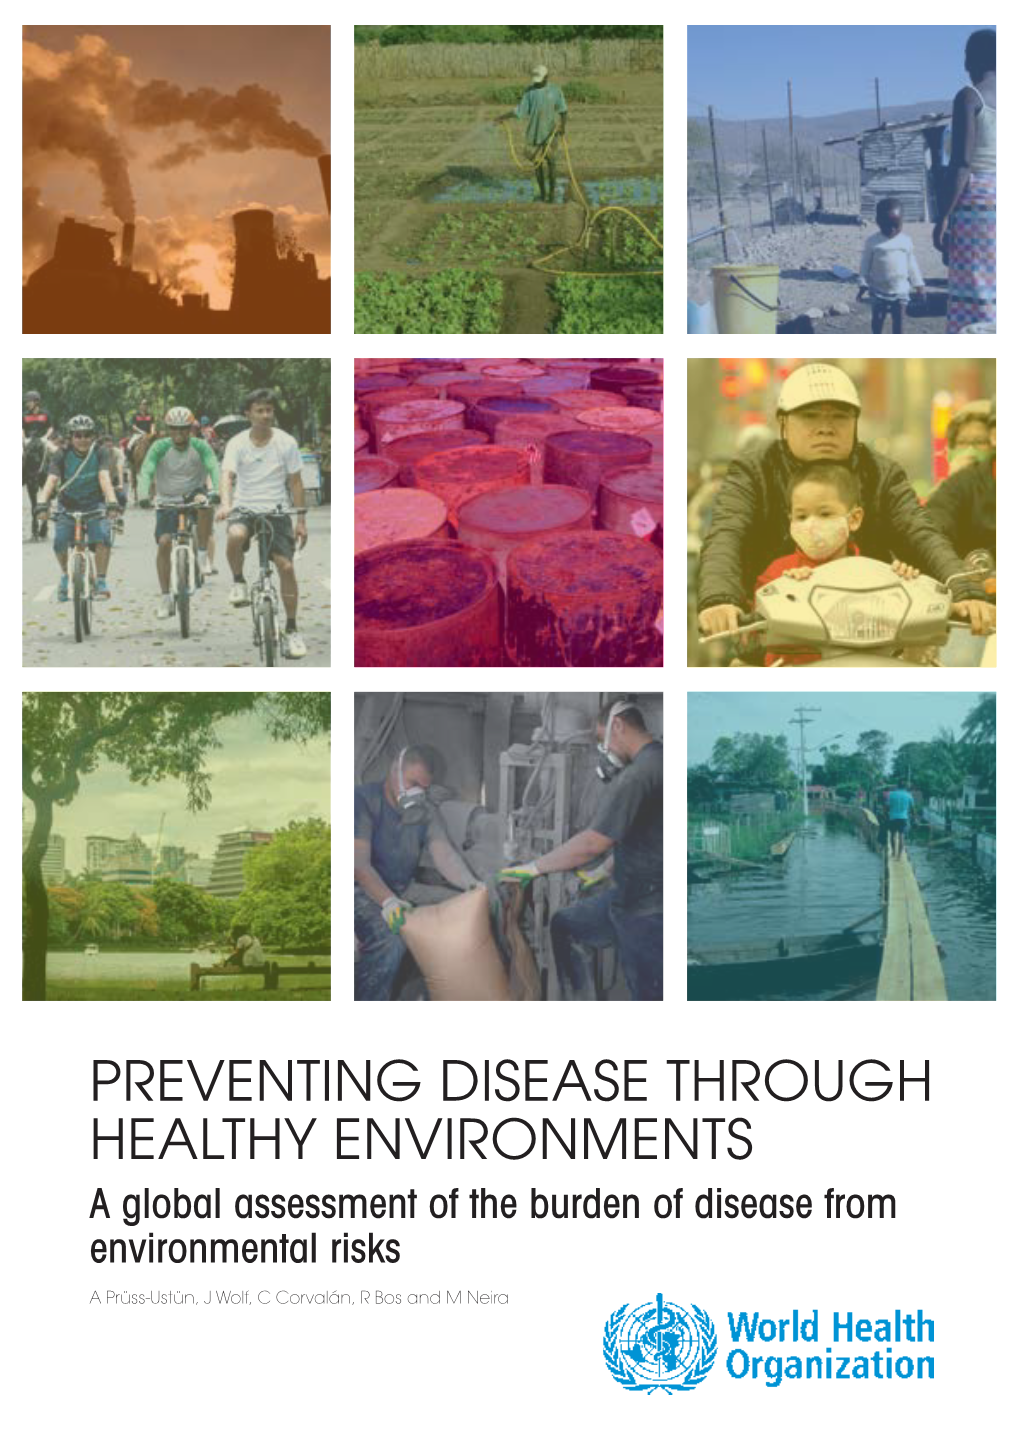 PREVENTING DISEASE THROUGH HEALTHY ENVIRONMENTS — a Global Assessment of the Burden Disease from Environmental Risks